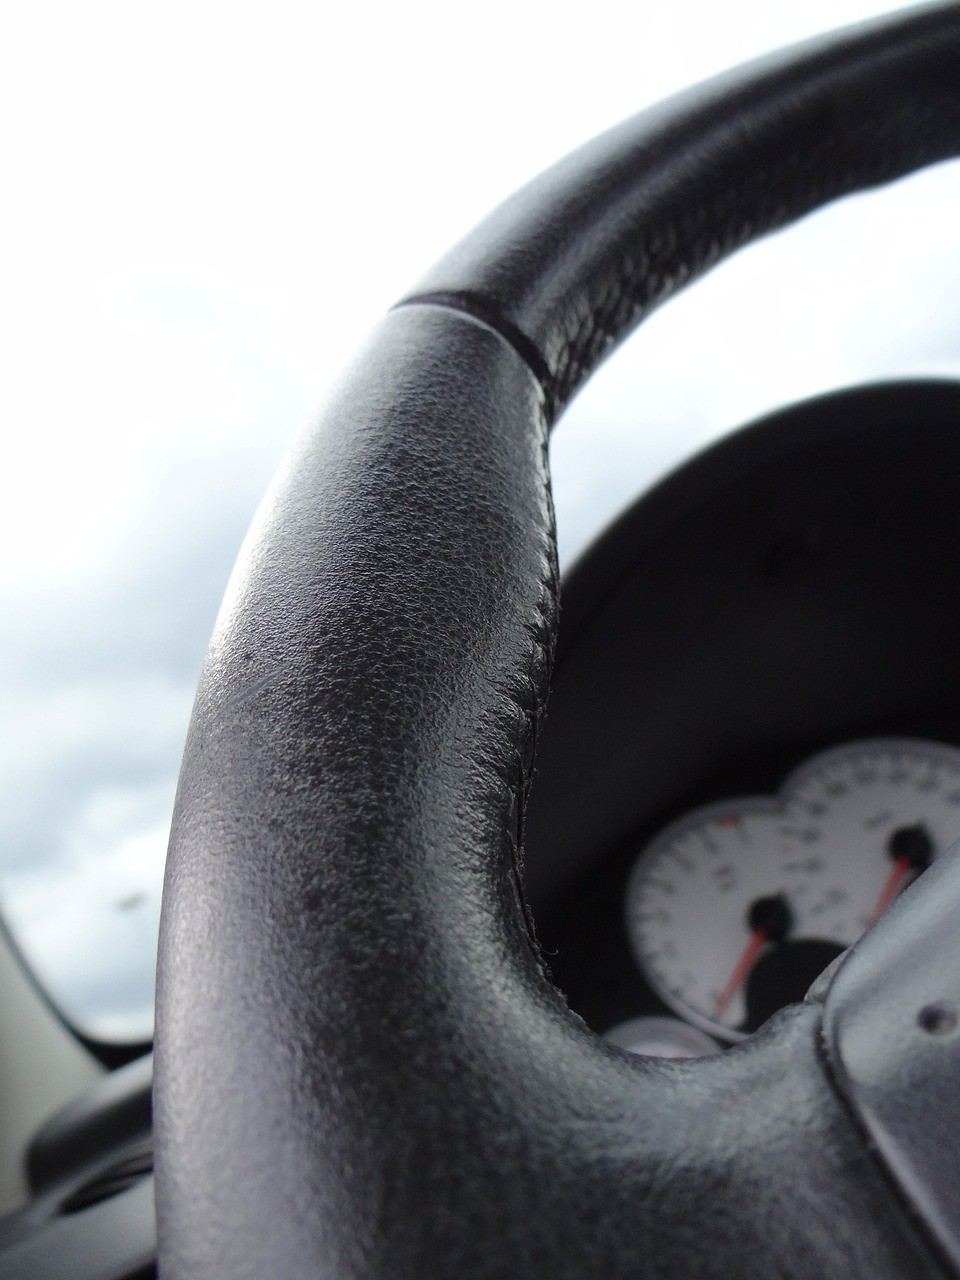 A steering wheel cover will prevent a steering wheel from becoming worn.